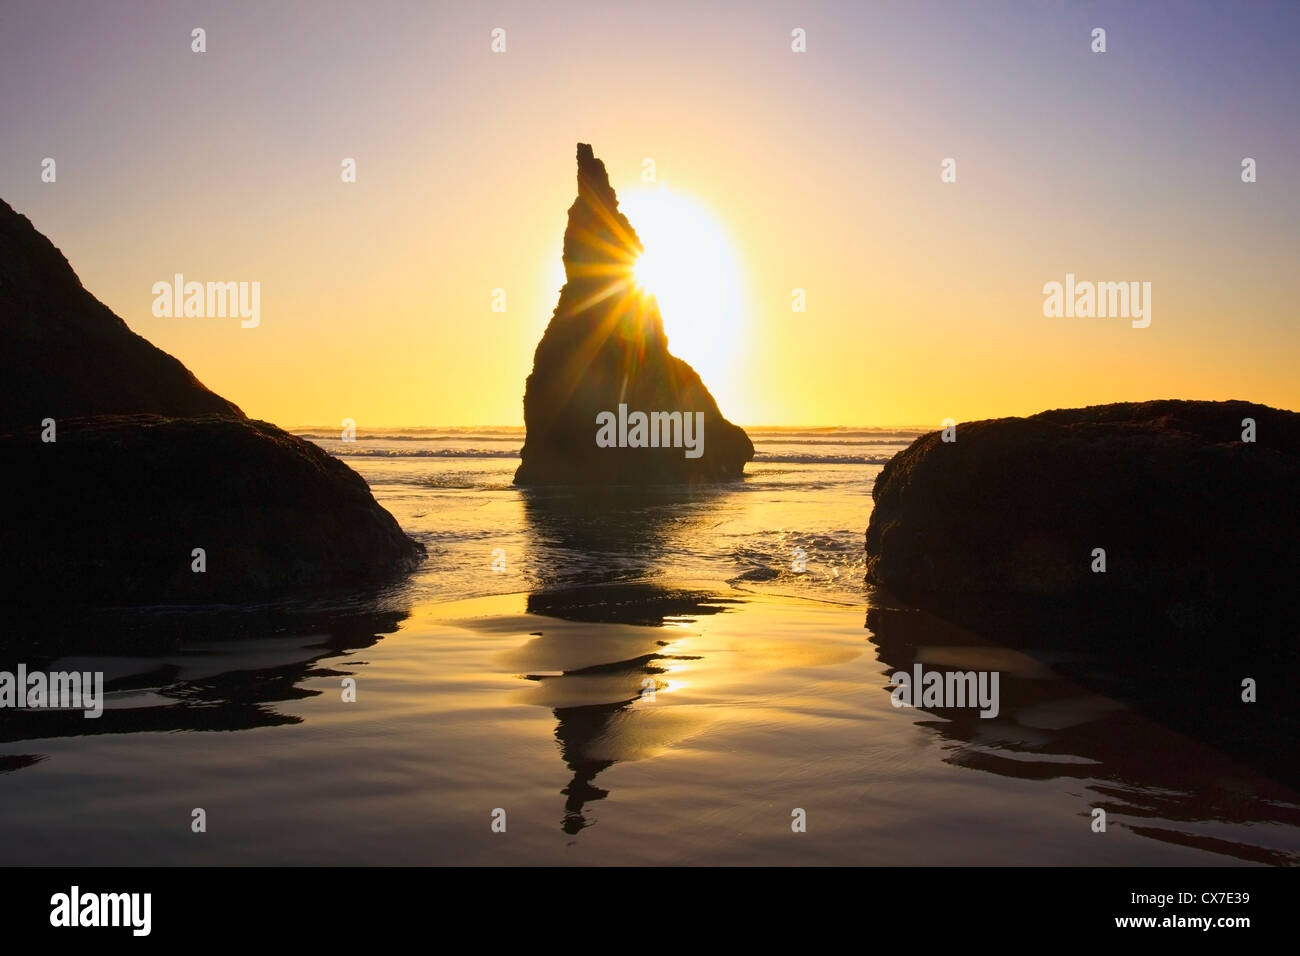 Rock Formations At Low Tide On Bandon Beach At Sunset; Oregon, United States Of America Stock Photo